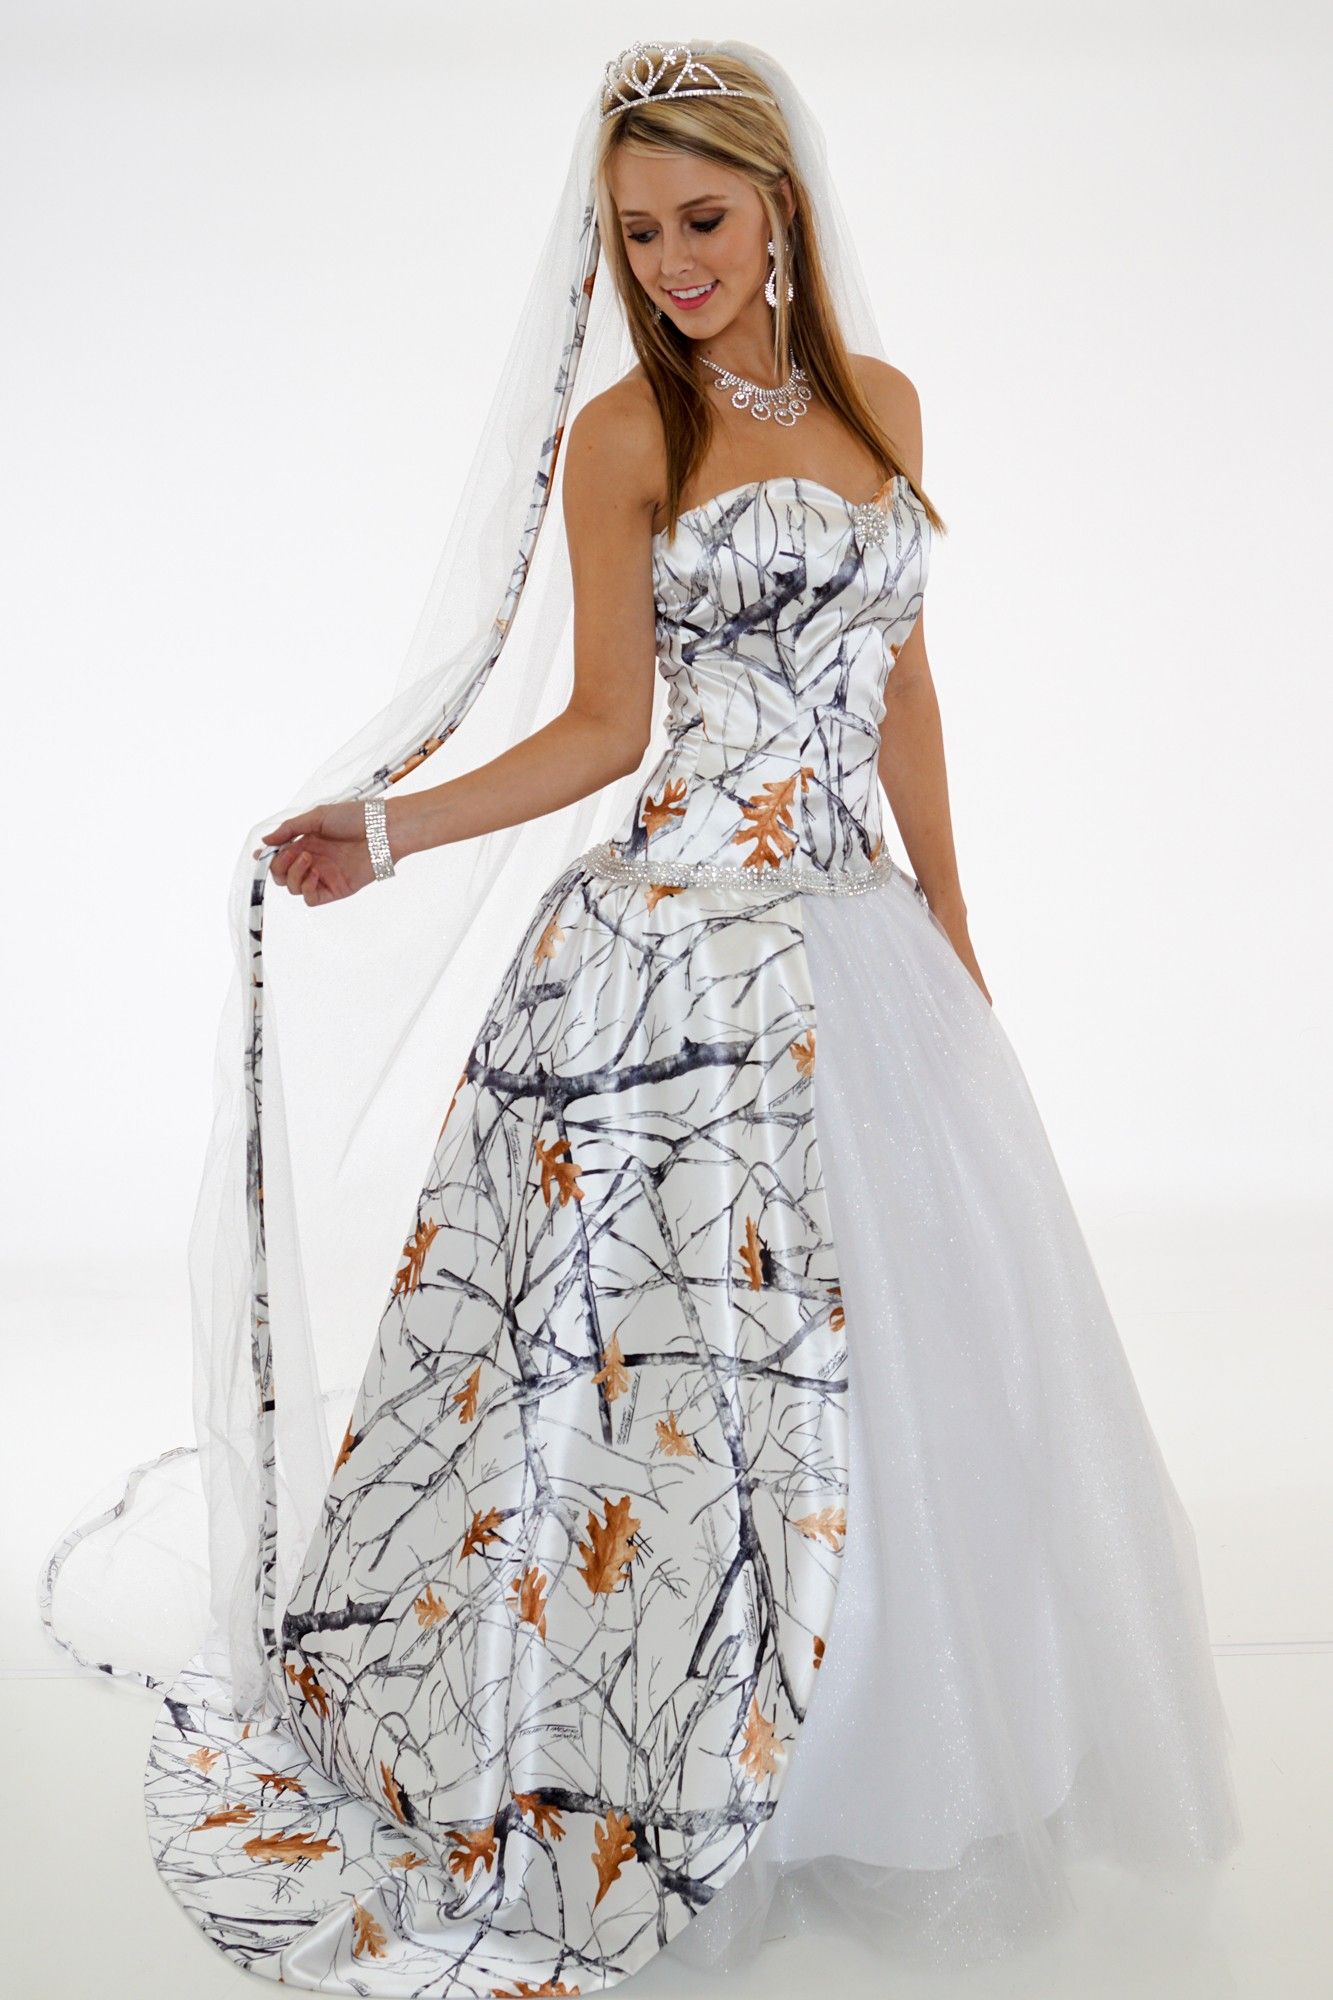 20 Camo Wedding Dresses Ideas To Make Your Big Day One Of A Kind